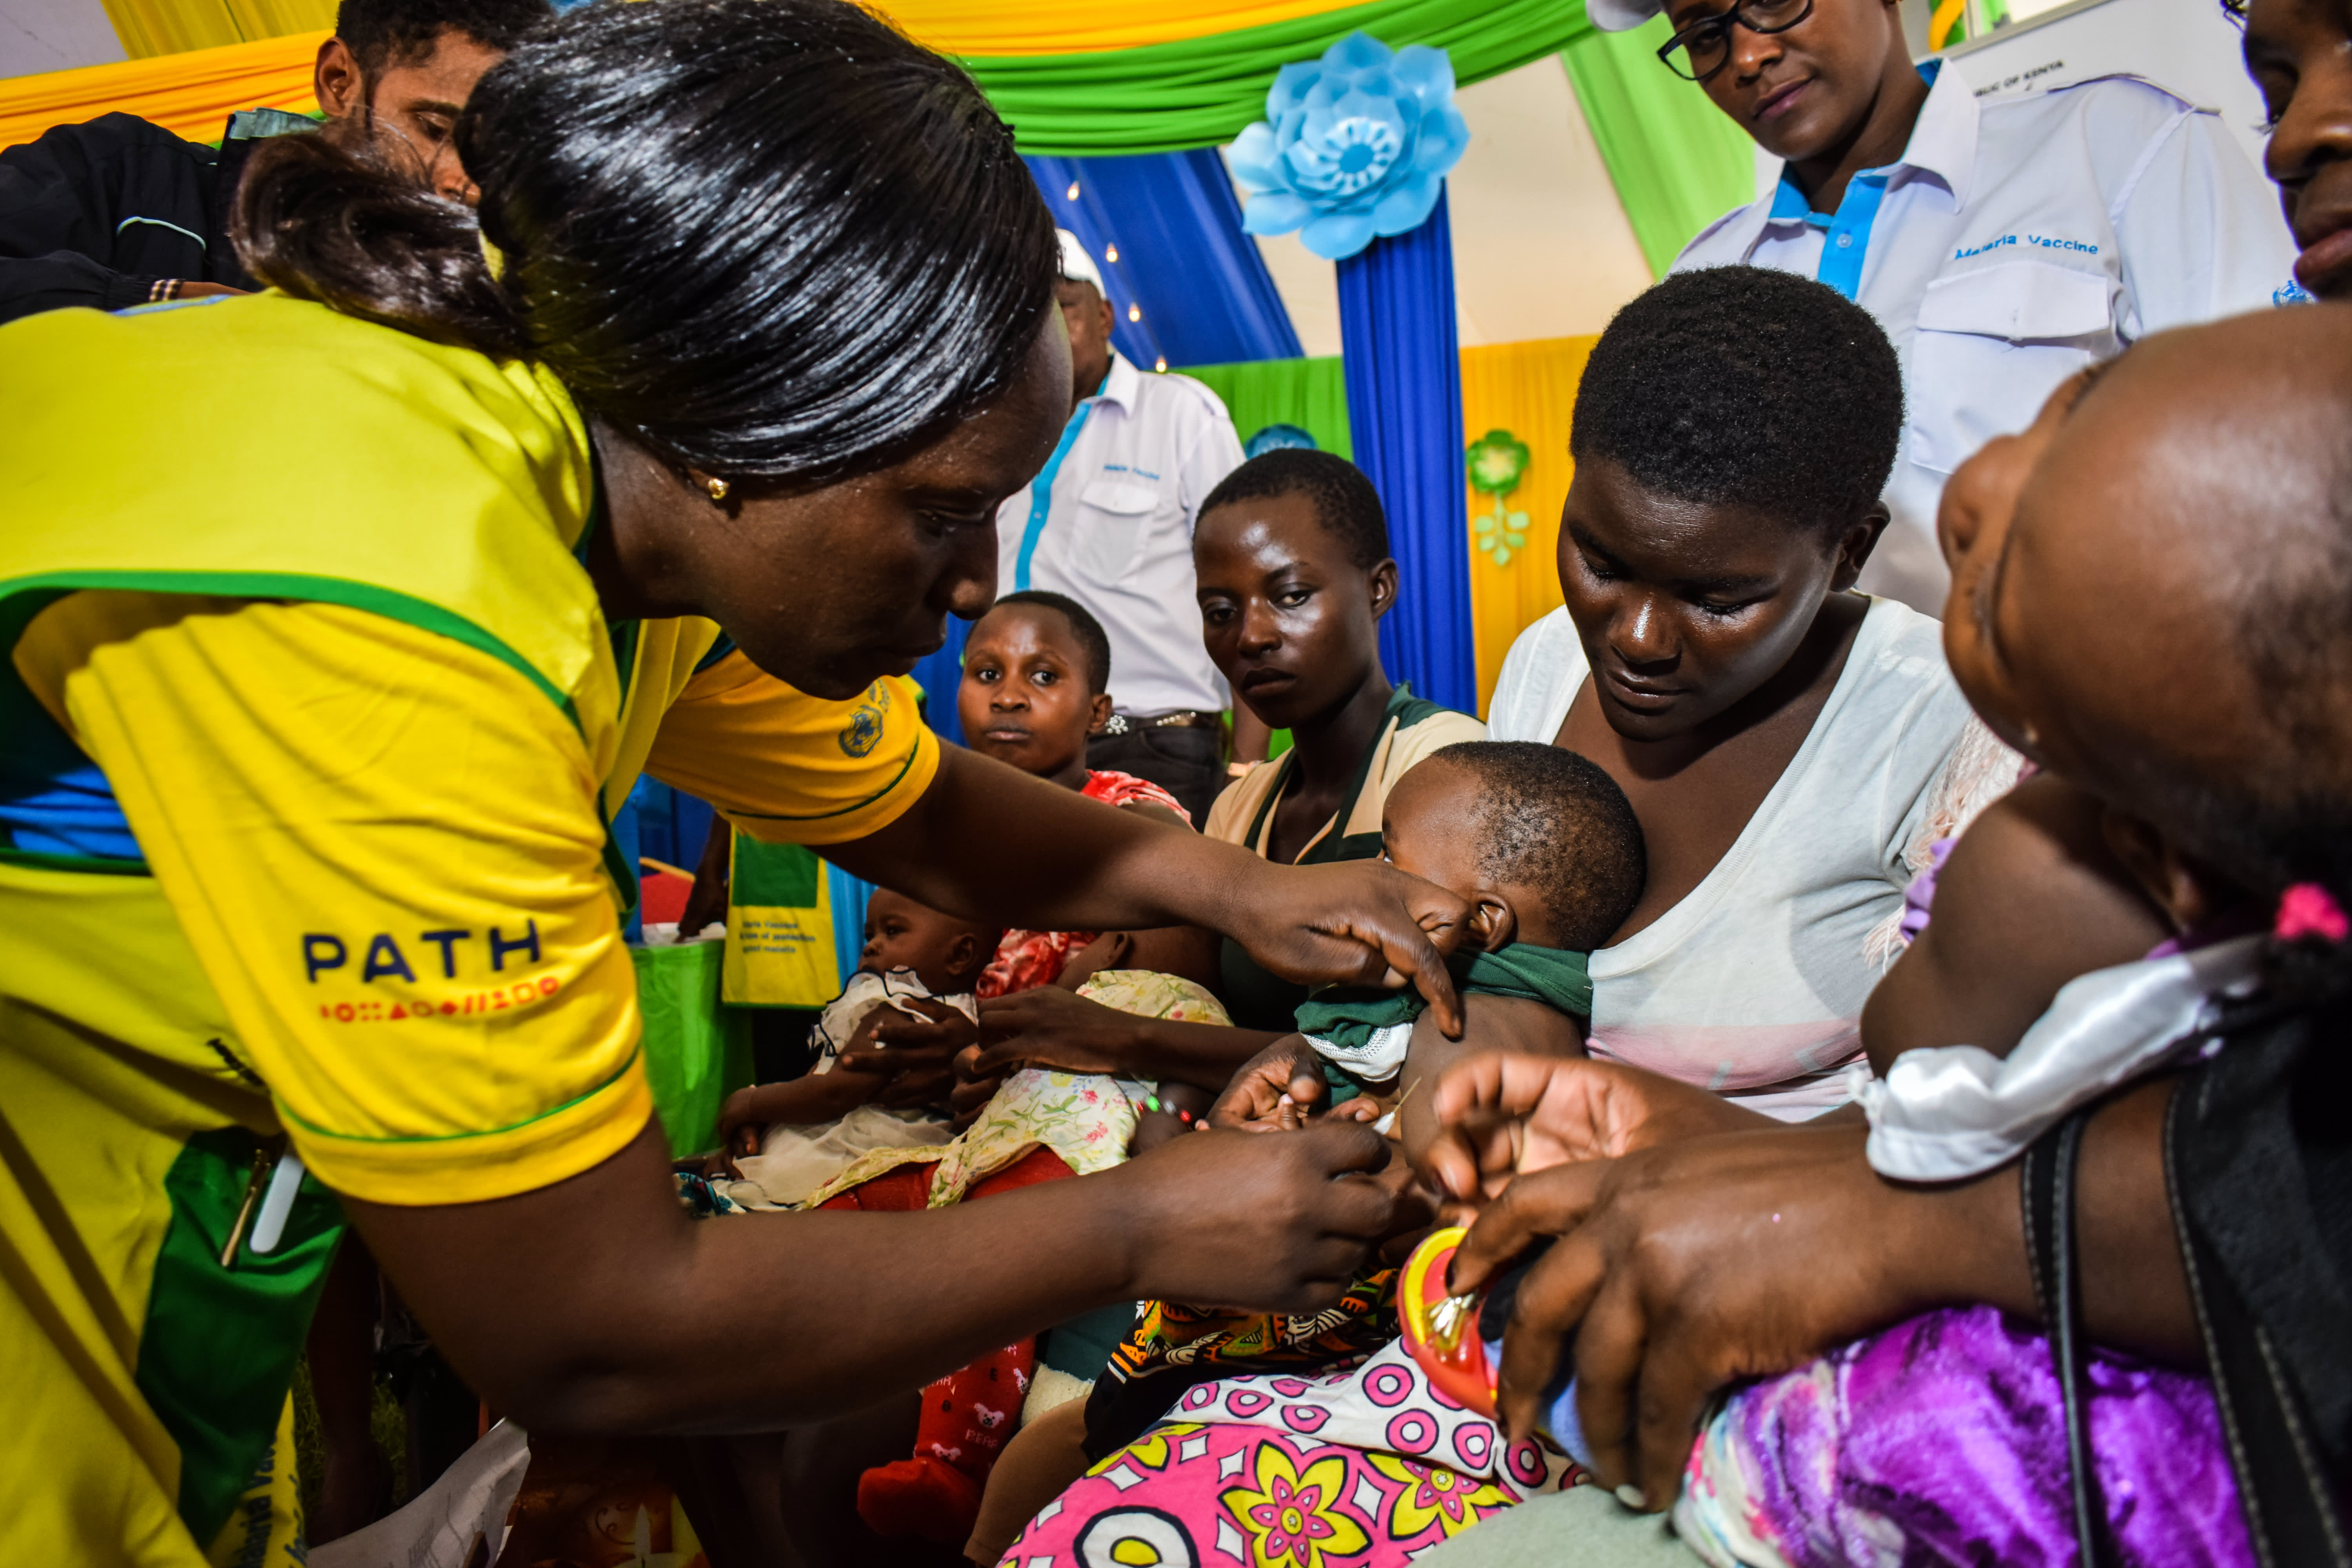 ‘A historic moment’: Why a malaria vaccine in Africa will reignite the fight against disease